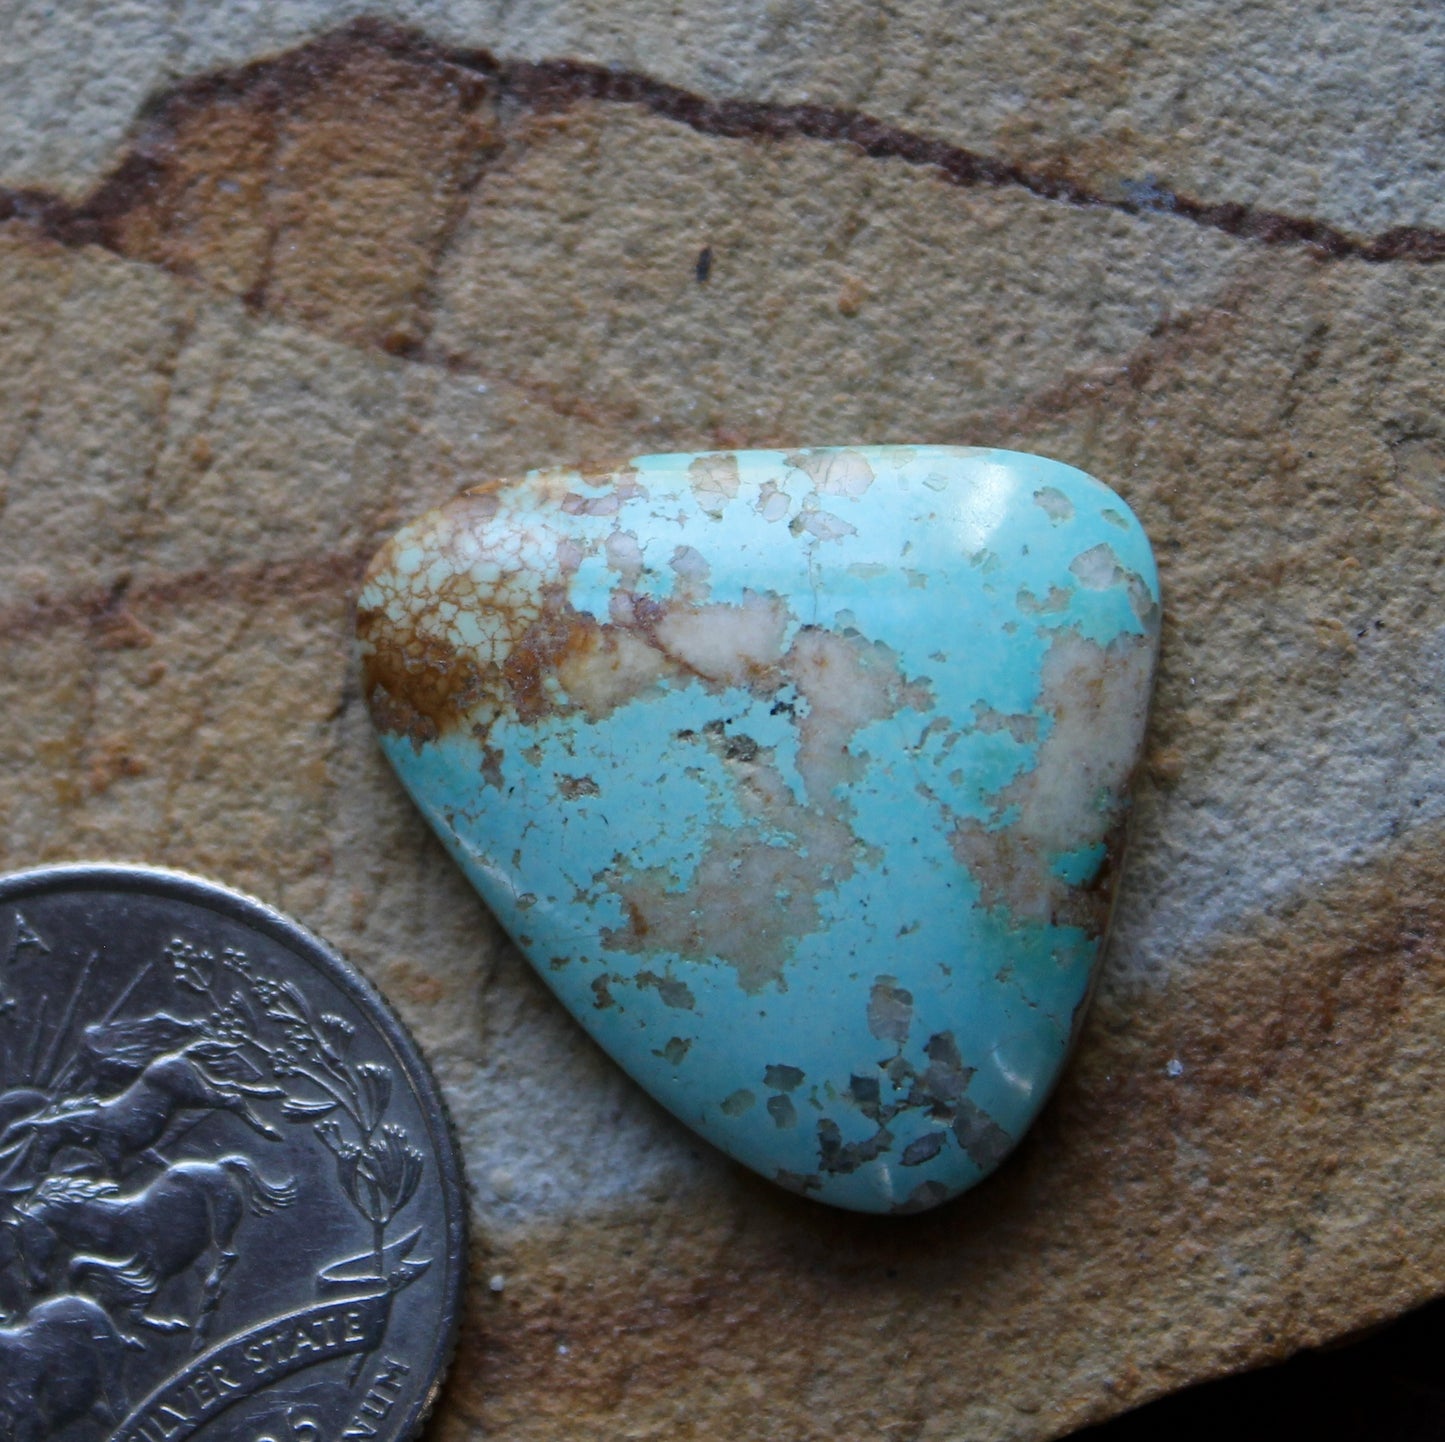 22 carat blue Stone Mountain Turquoise cabochon with a high dome